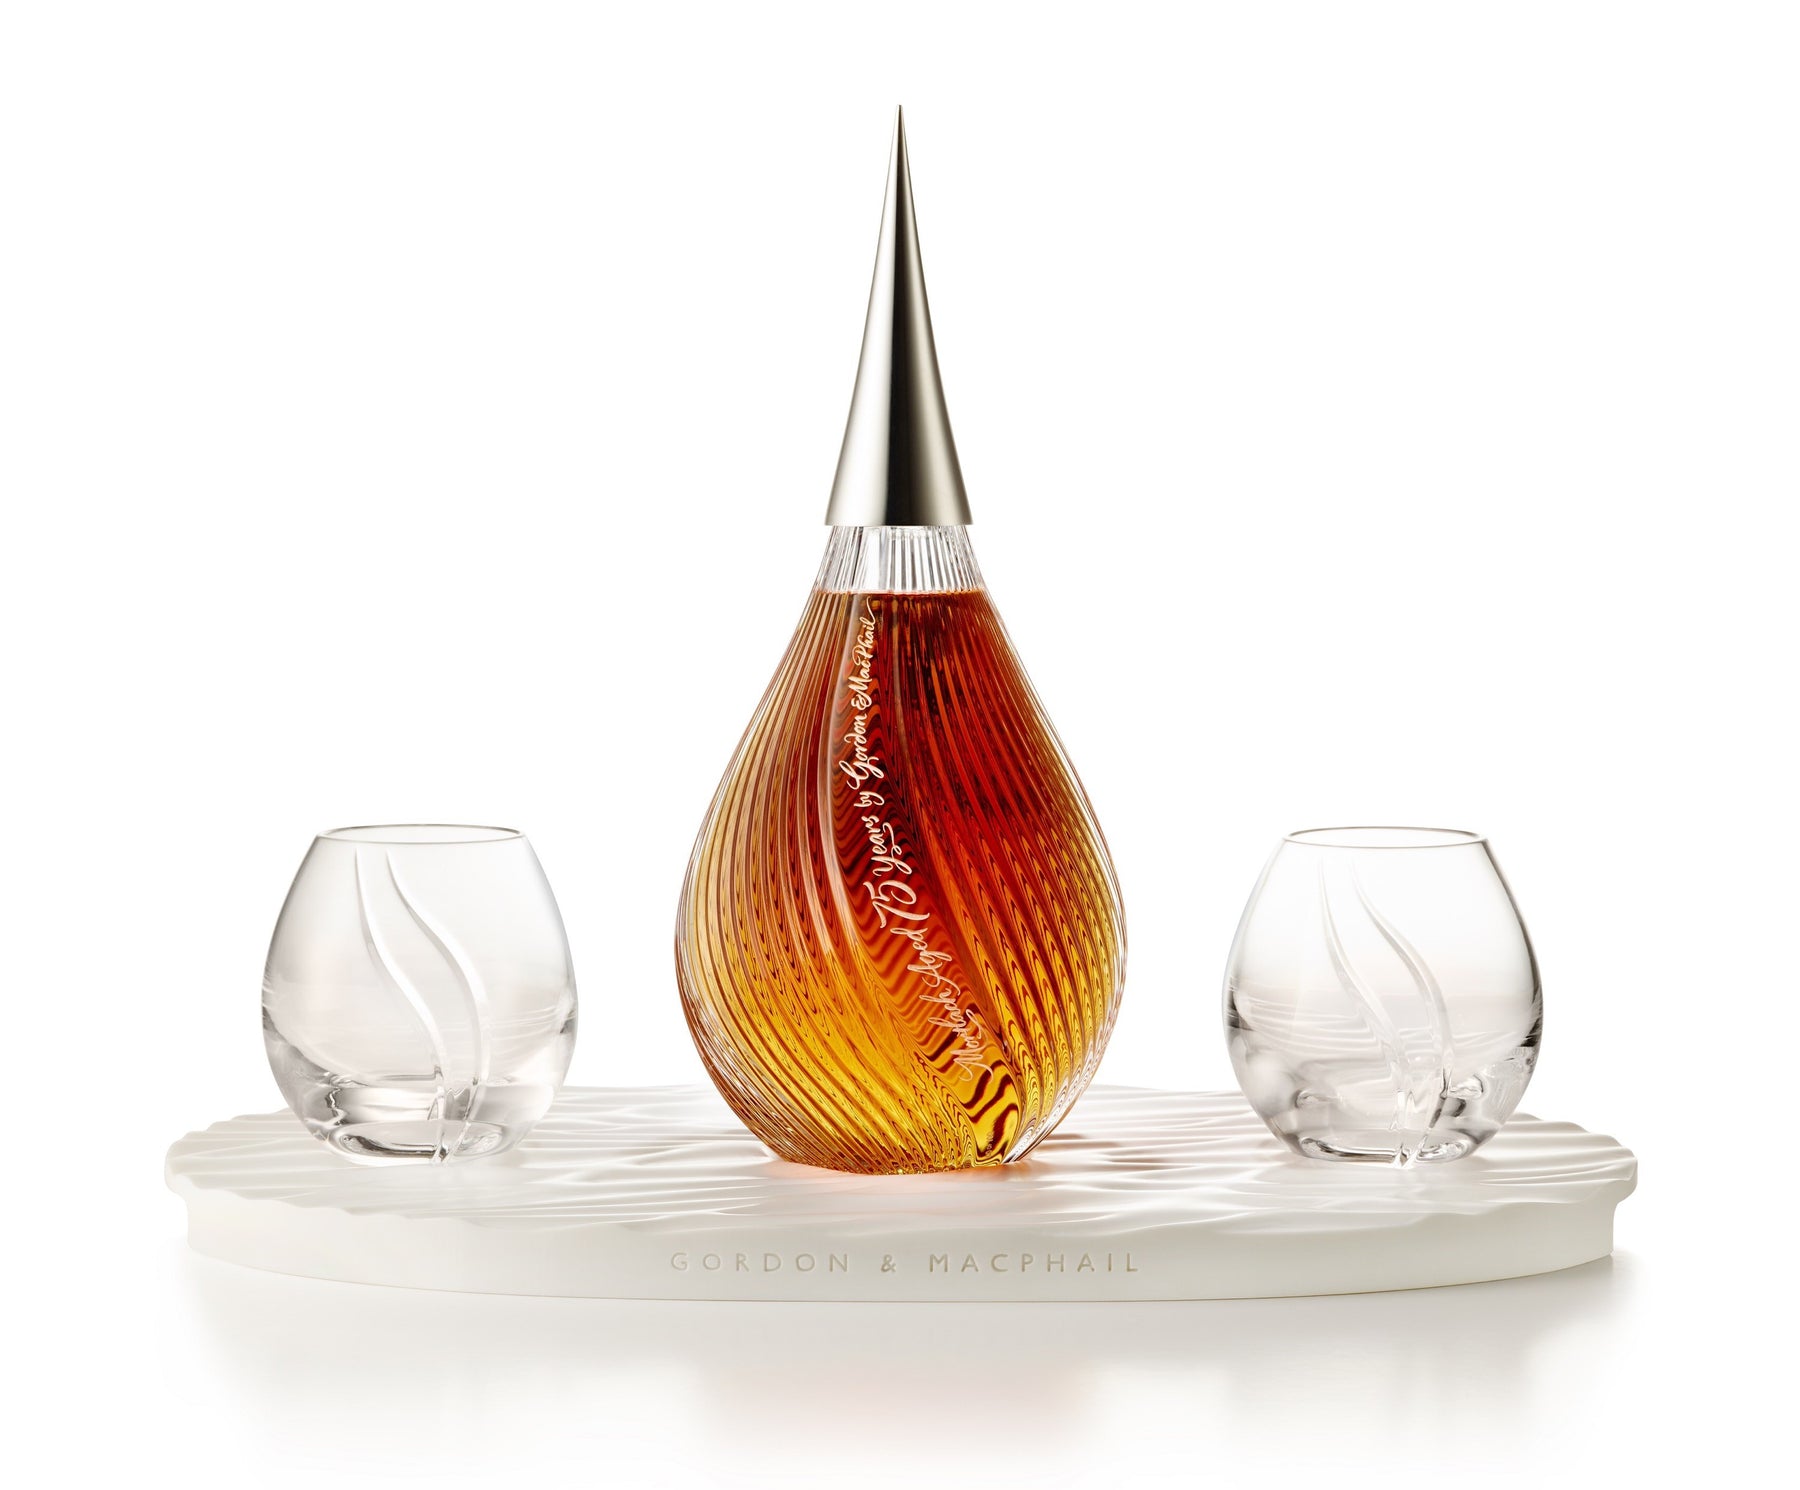 Mortlach 75 Year Old - The Oldest Whisky in the World!